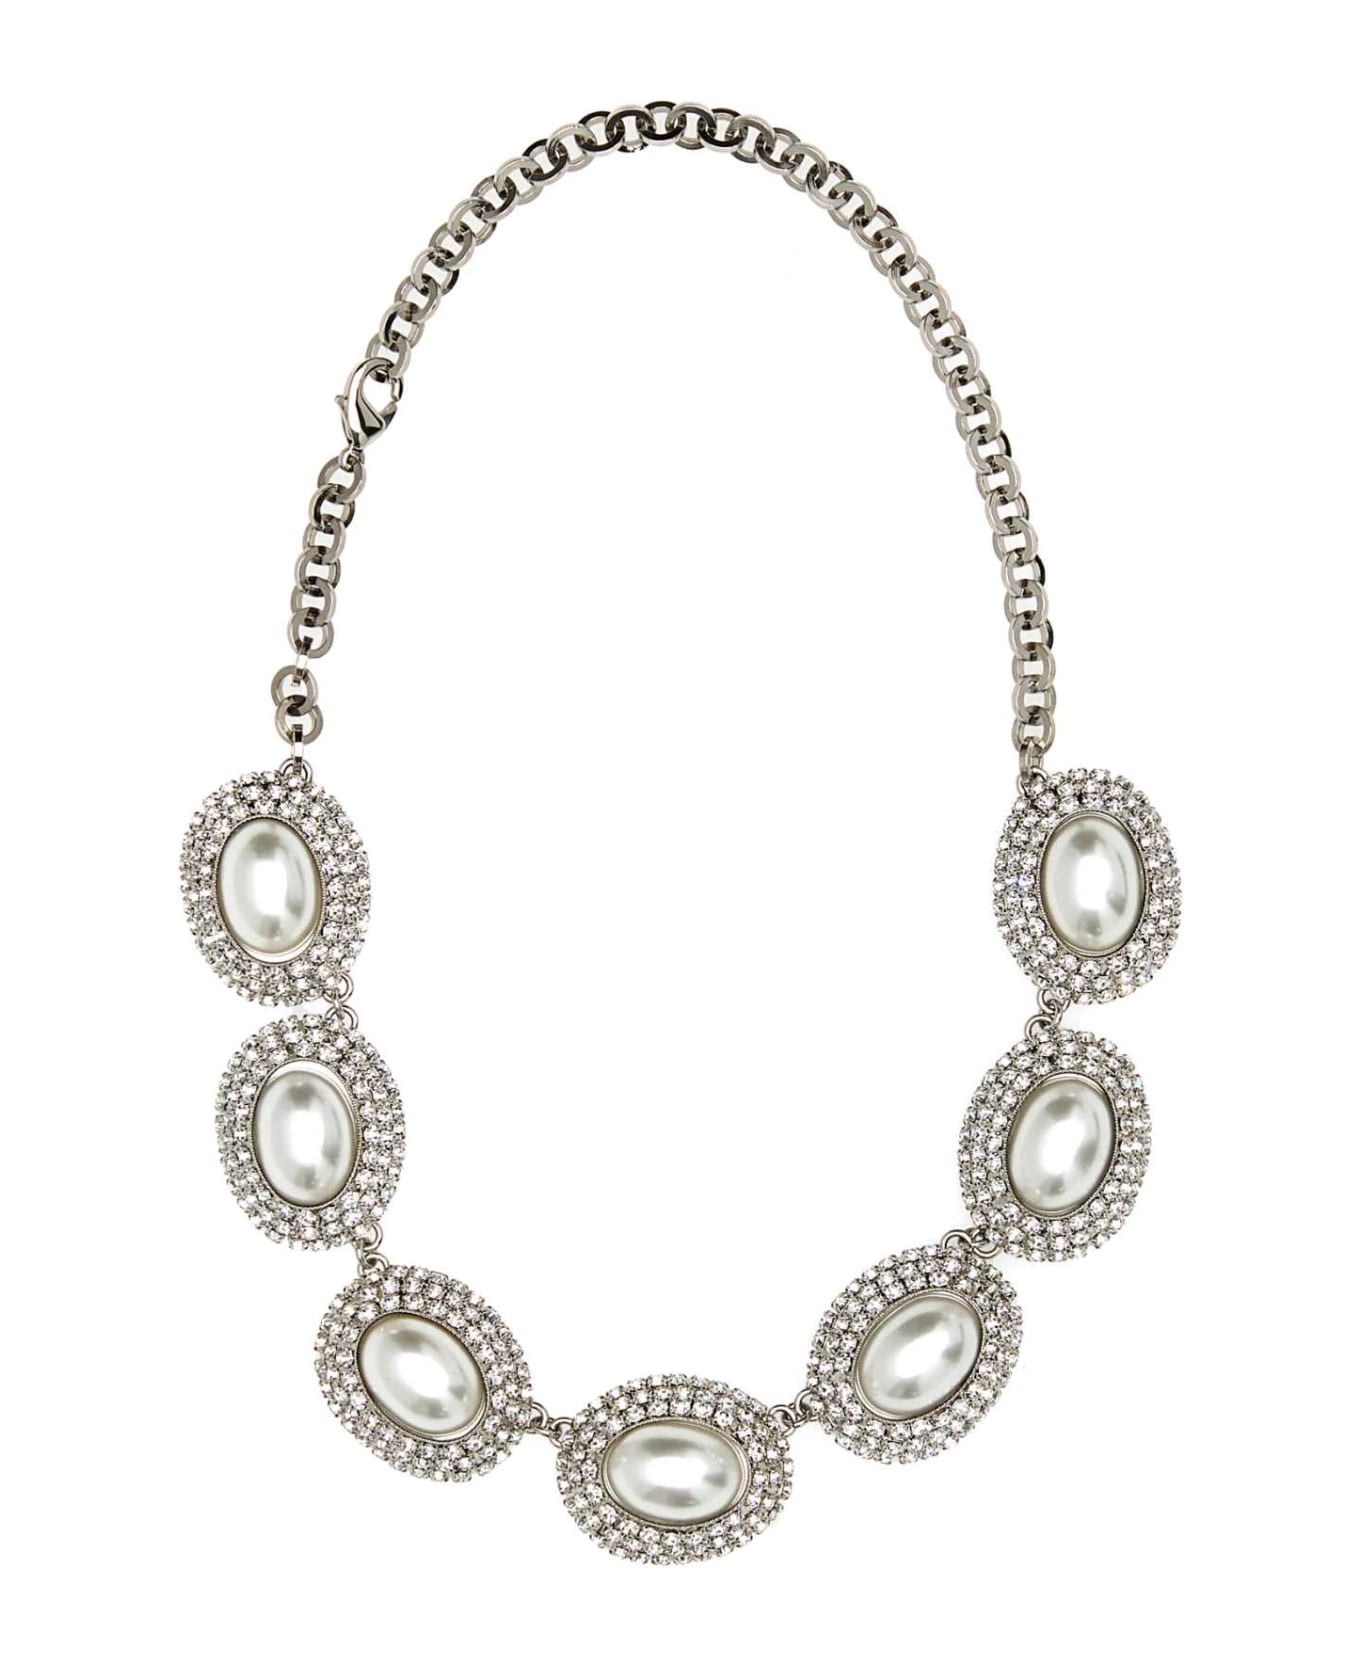 Alessandra Rich Embellished Metal Necklace - CRYSILVER